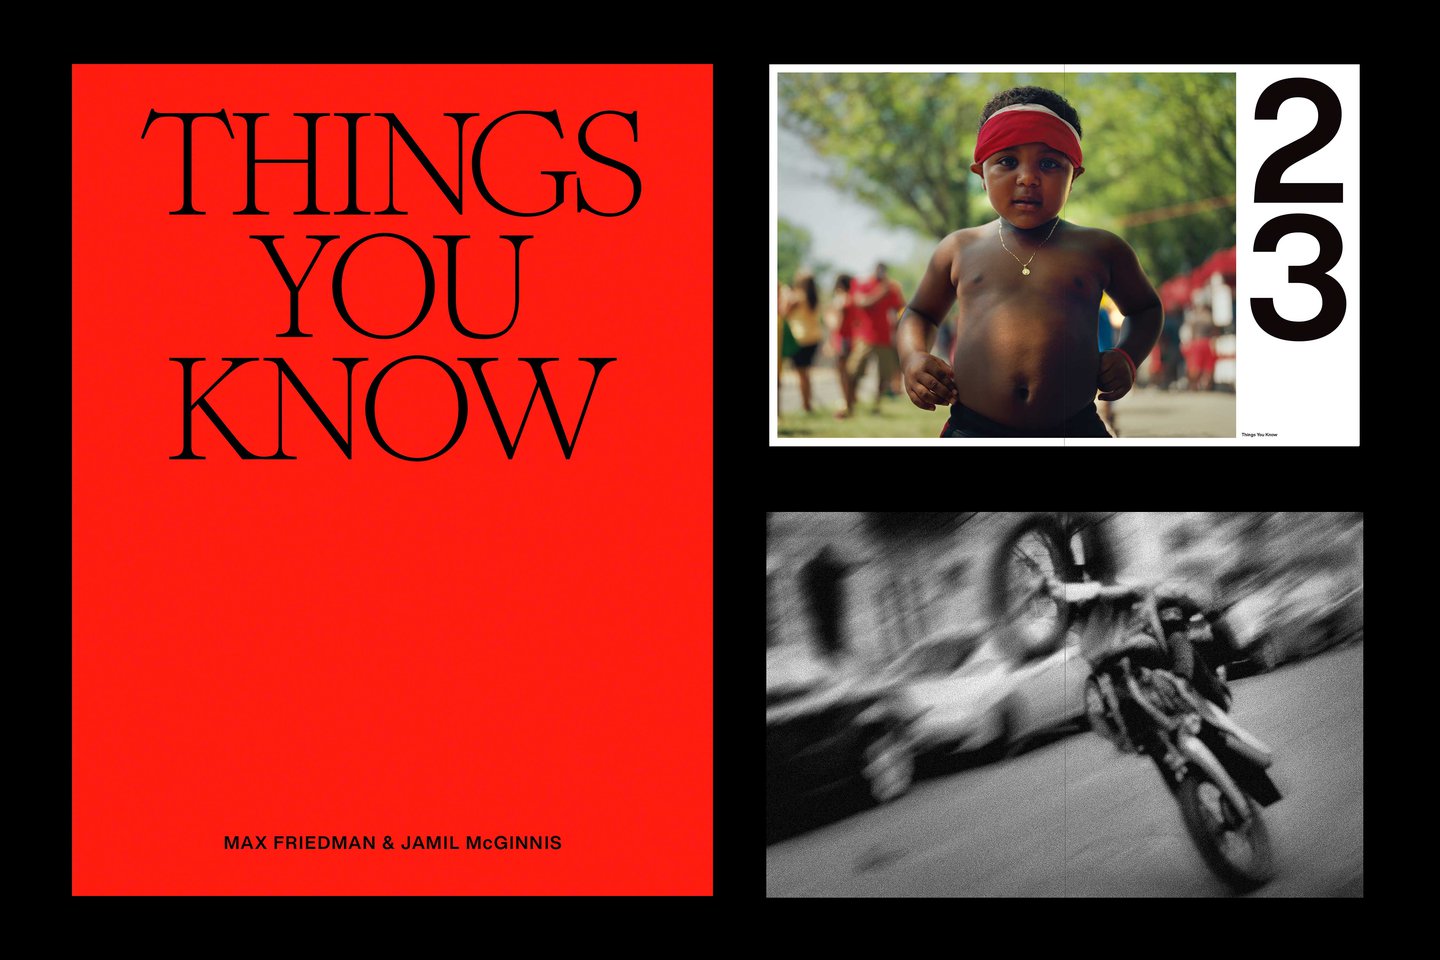 Things You Know is a zine documenting the NYC neighbourhood of Crown Heights